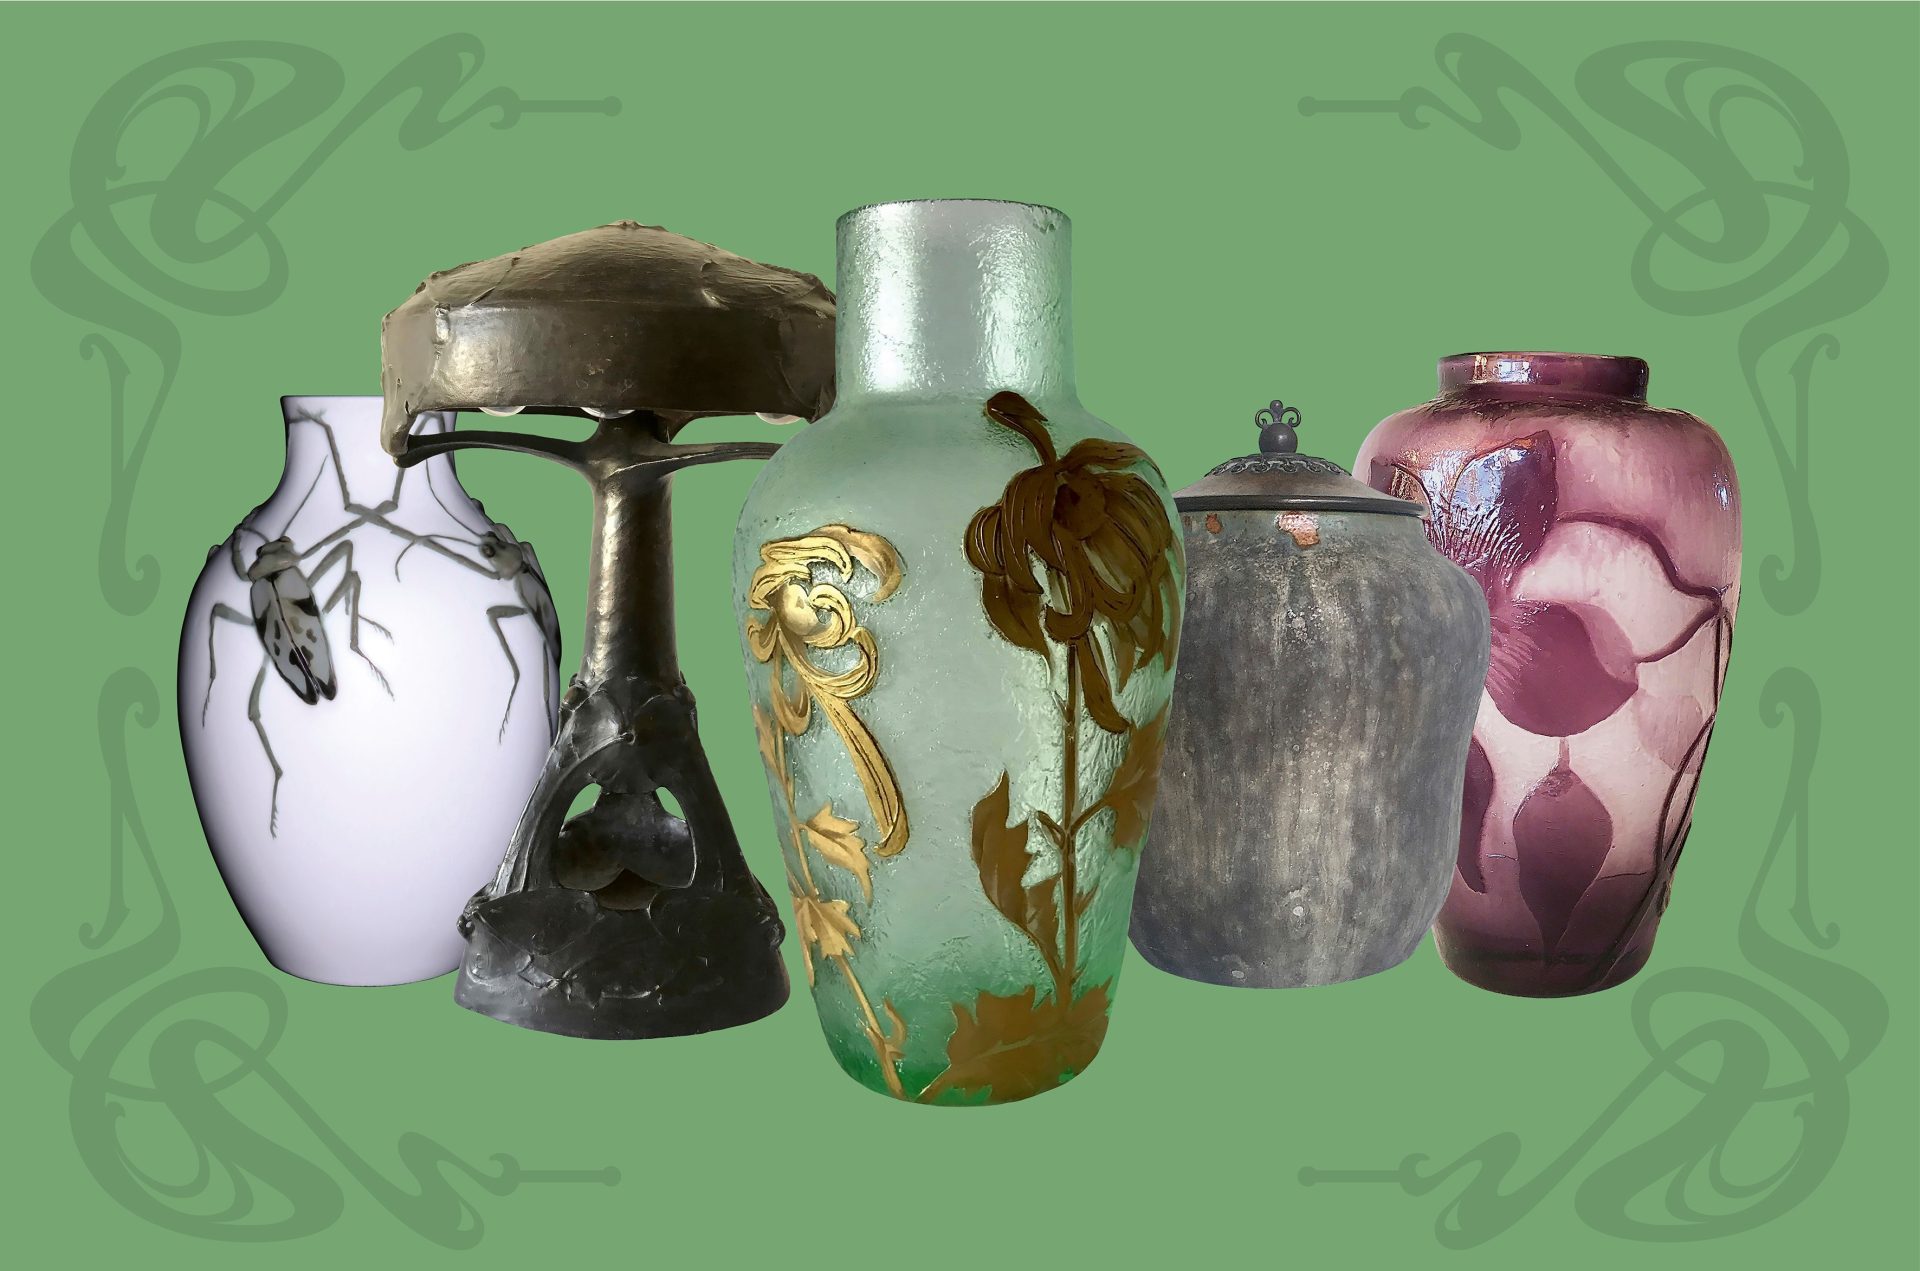 A montage with several different vases from the exhibition against a green background